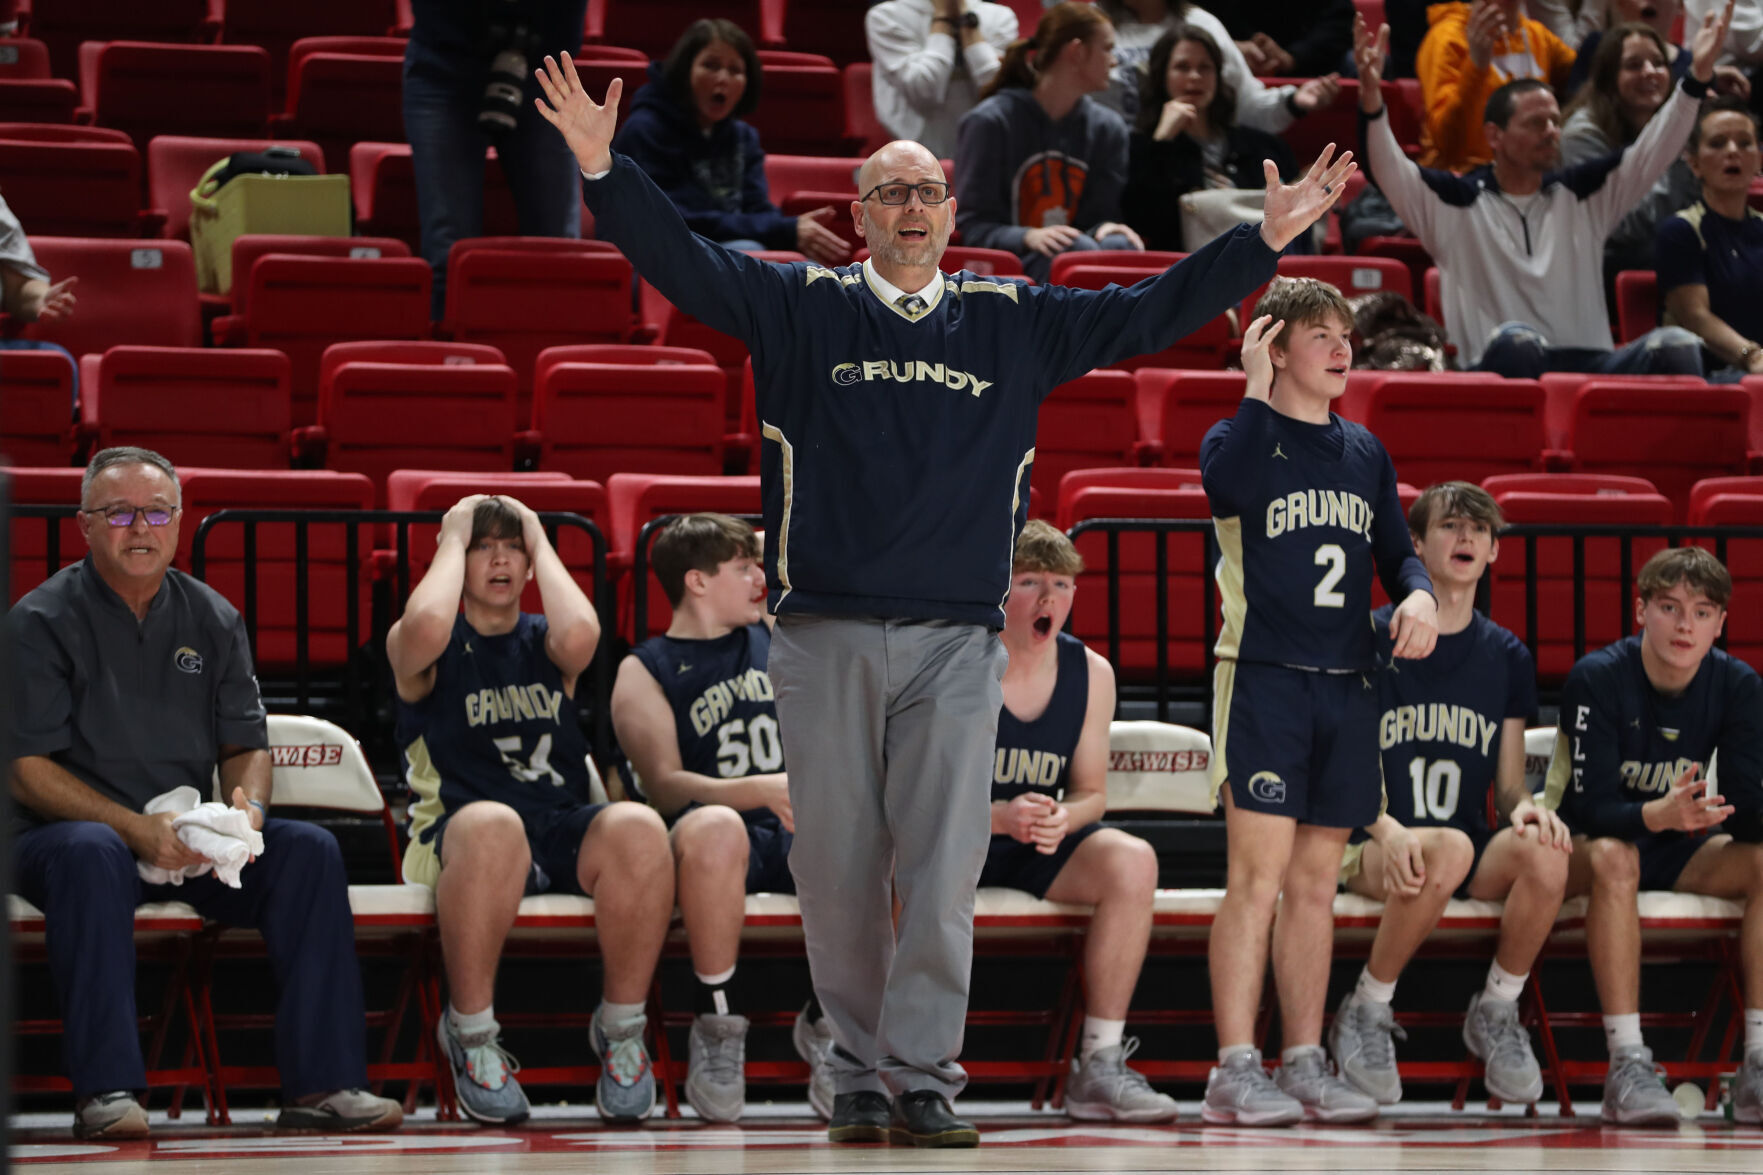 Brian Looney Resigns as Grundy High Boys Basketball Coach After 8 Seasons: Successor Named, Record & Achievements Highlighted